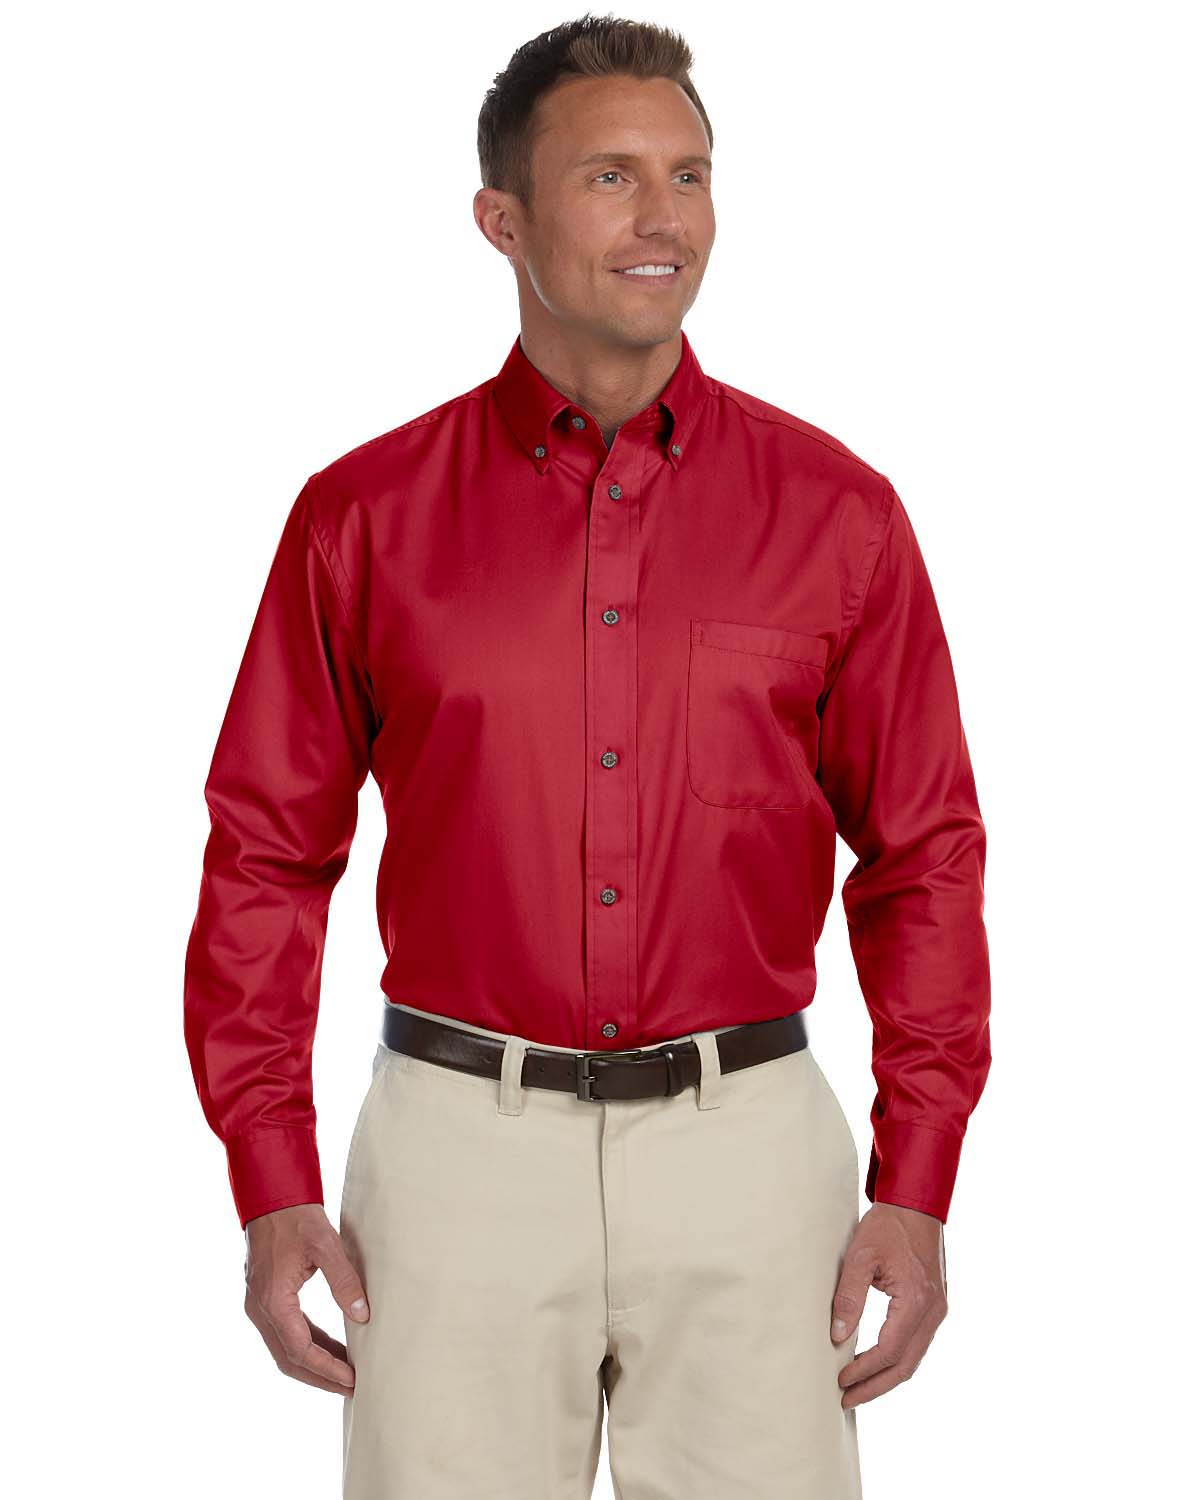 Harriton M500 Men's Twill Shirt with Stain Release $17.85 - Woven/Dress ...